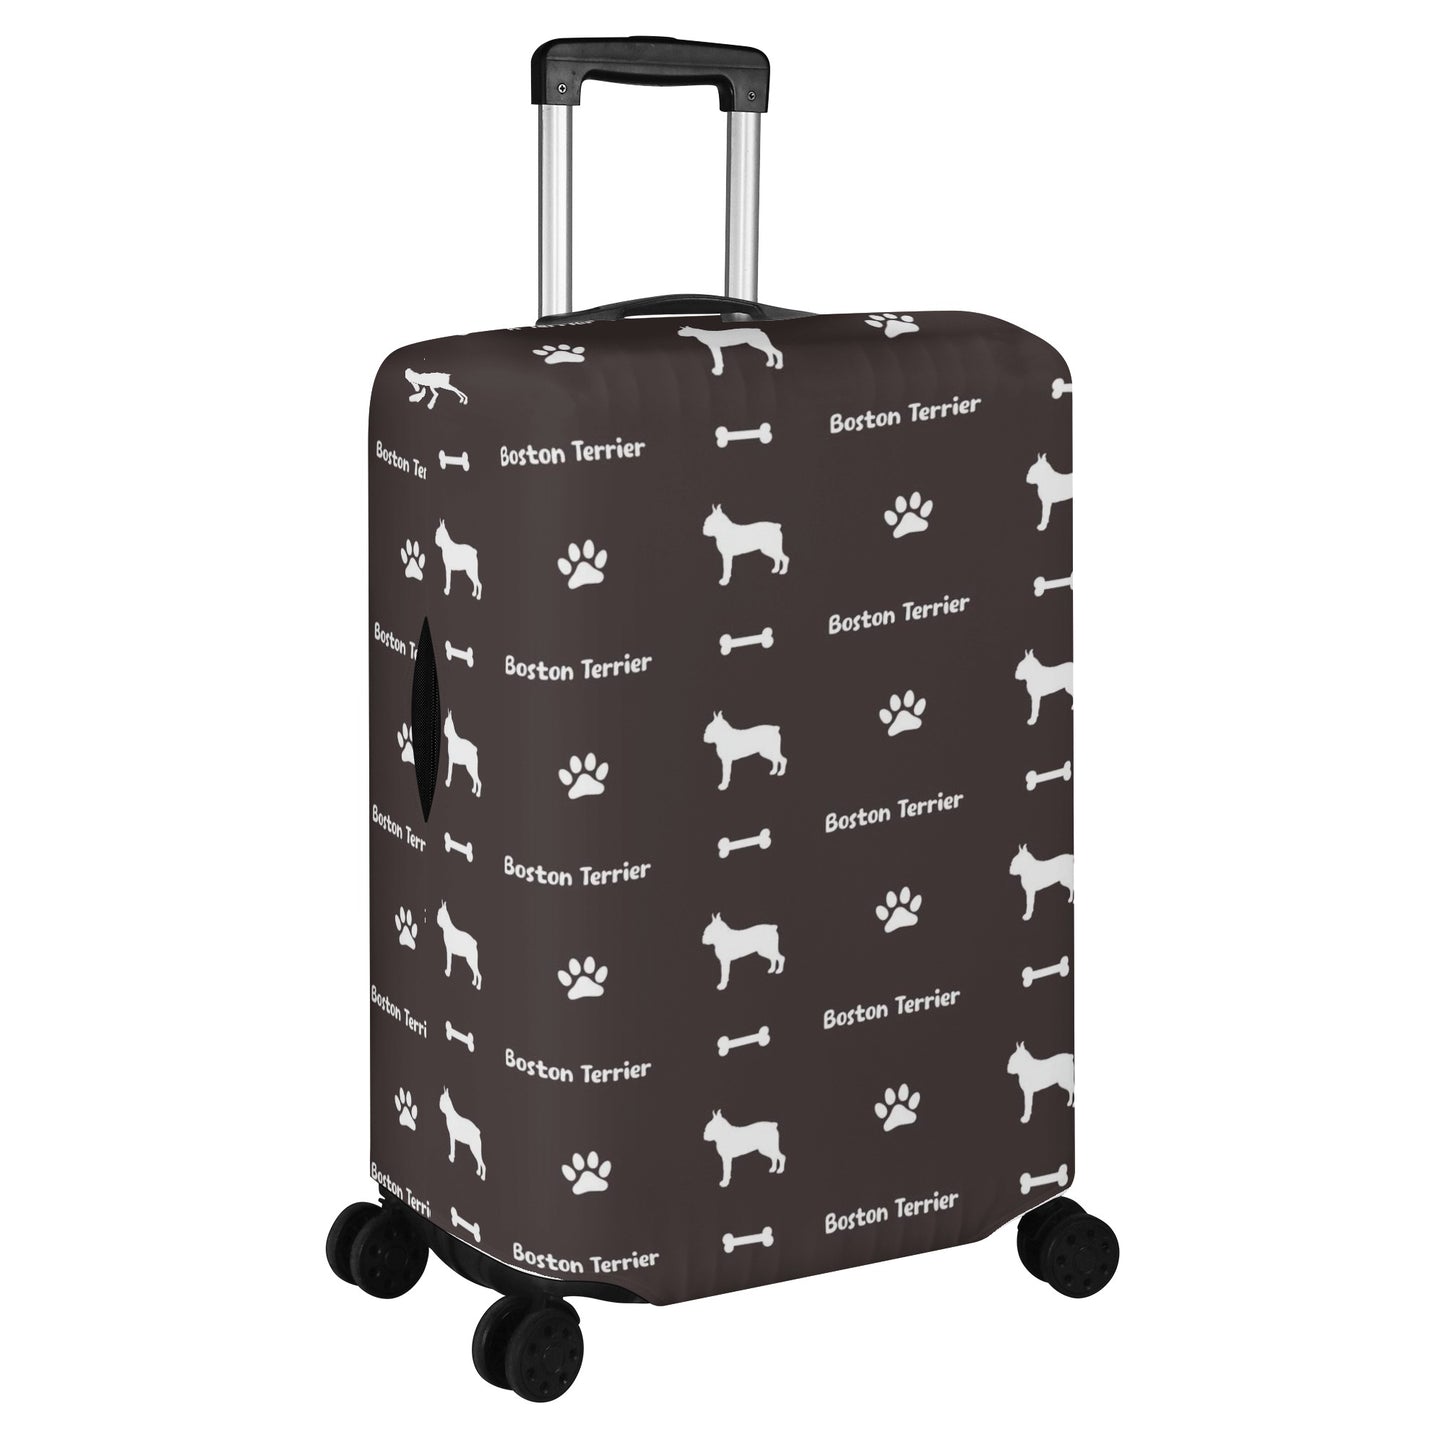 Rosie  - Luggage Cover for Boston Terrier lovers